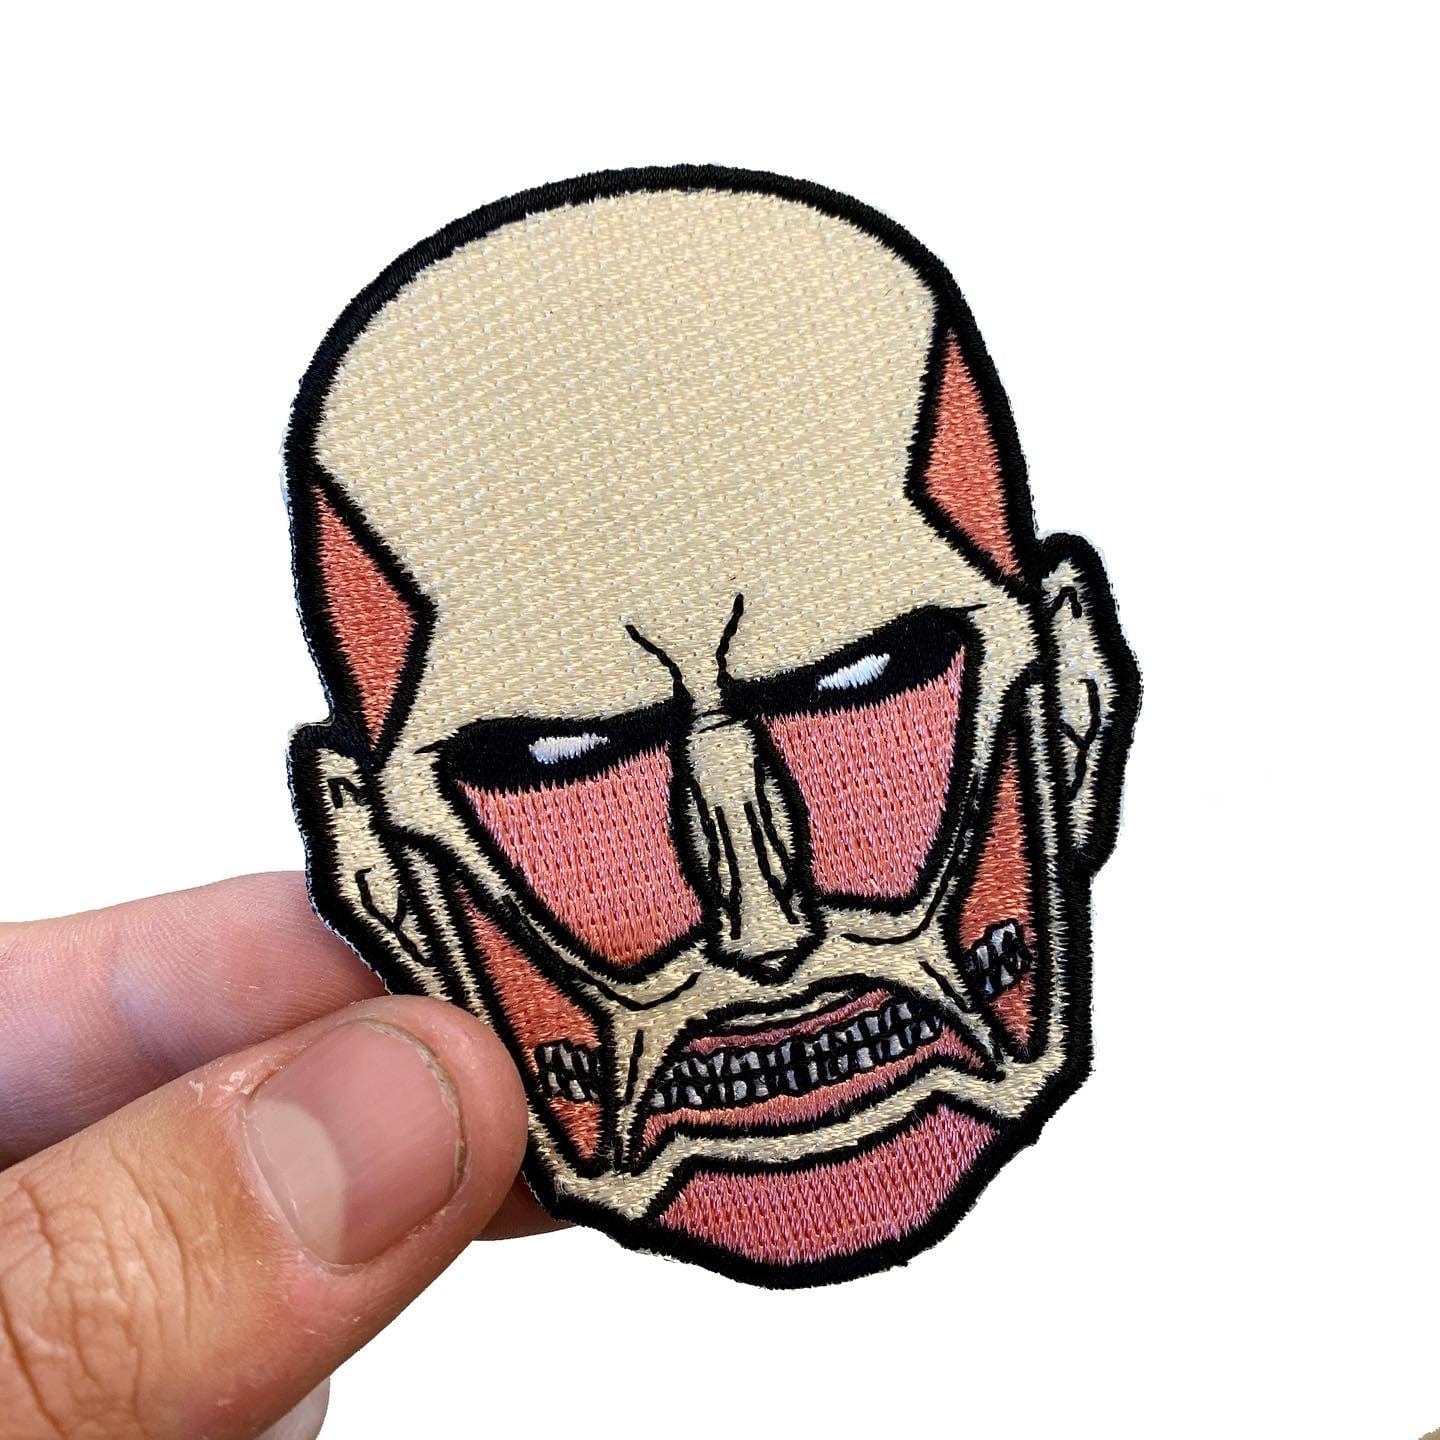 Colossal Titan Patch